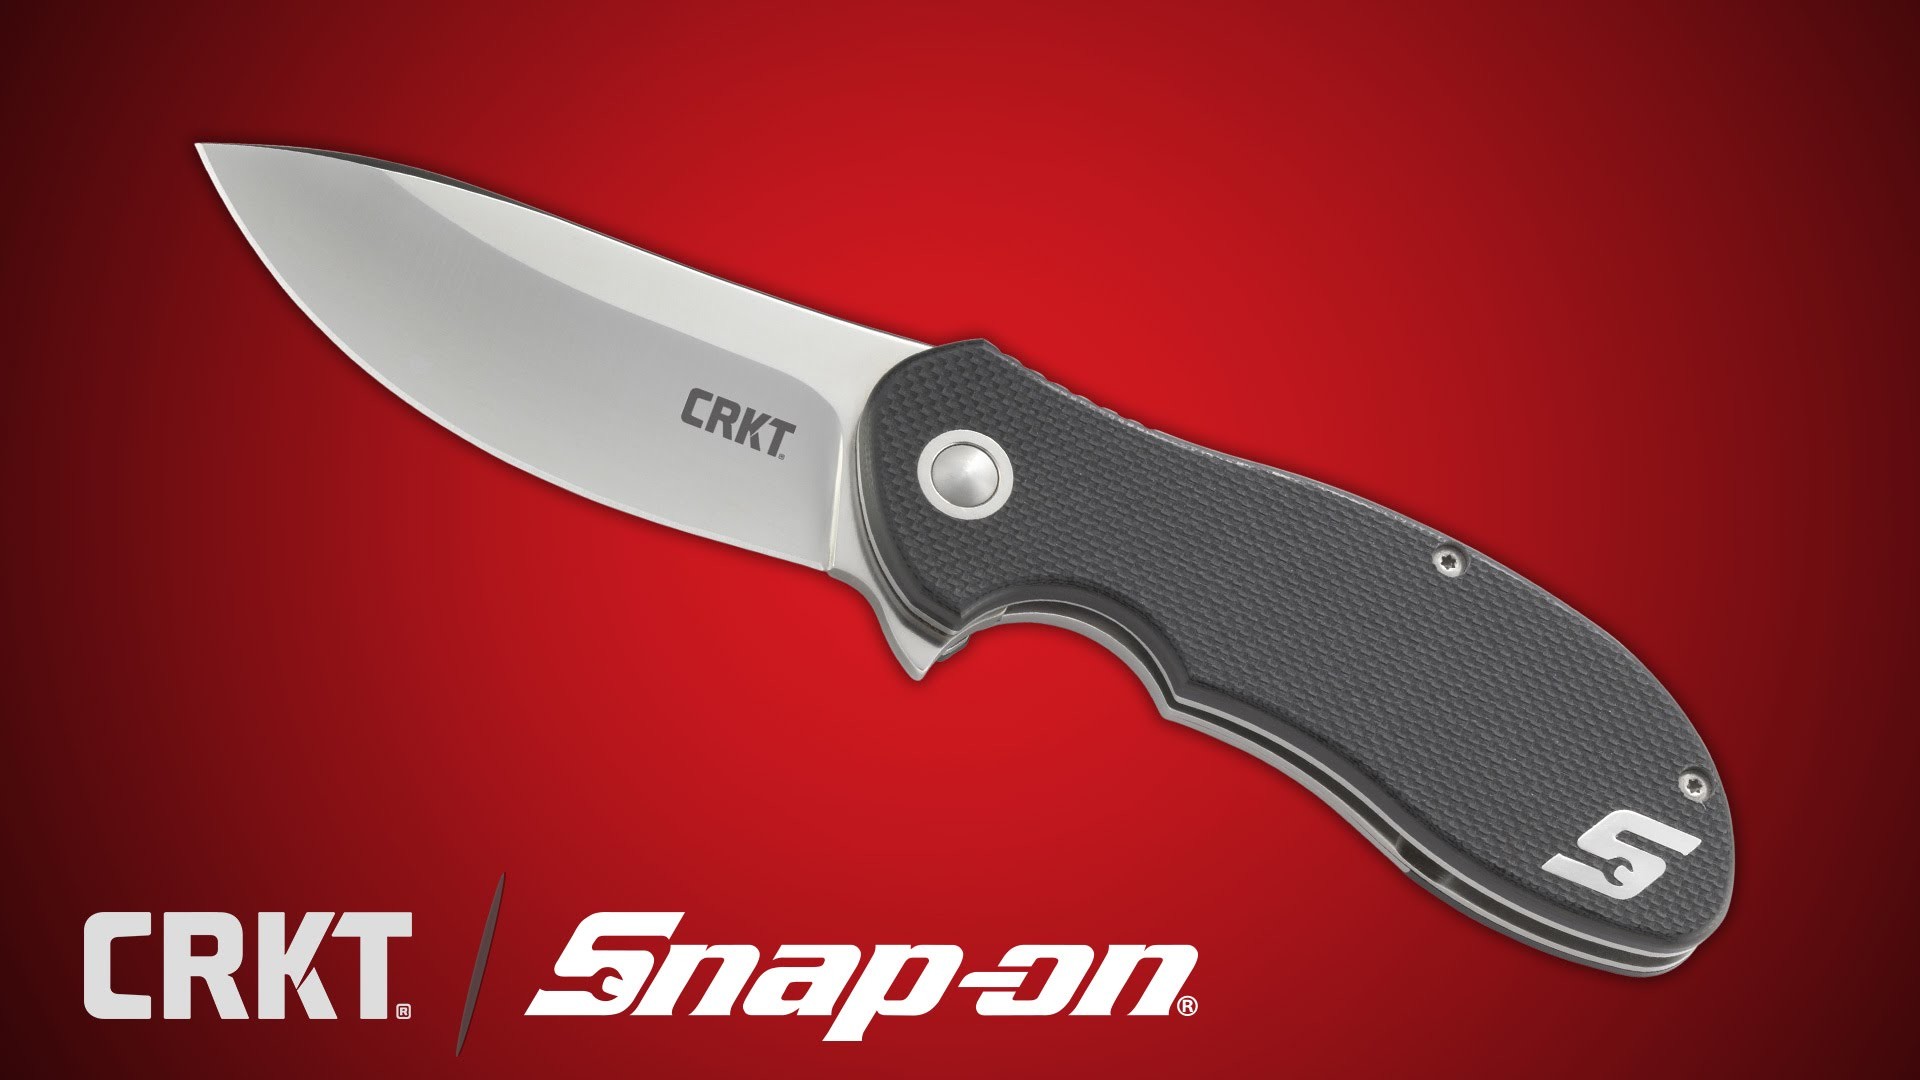 1920x1080 Snap-on Exclusive Relay Knife | a Ken Onion Design